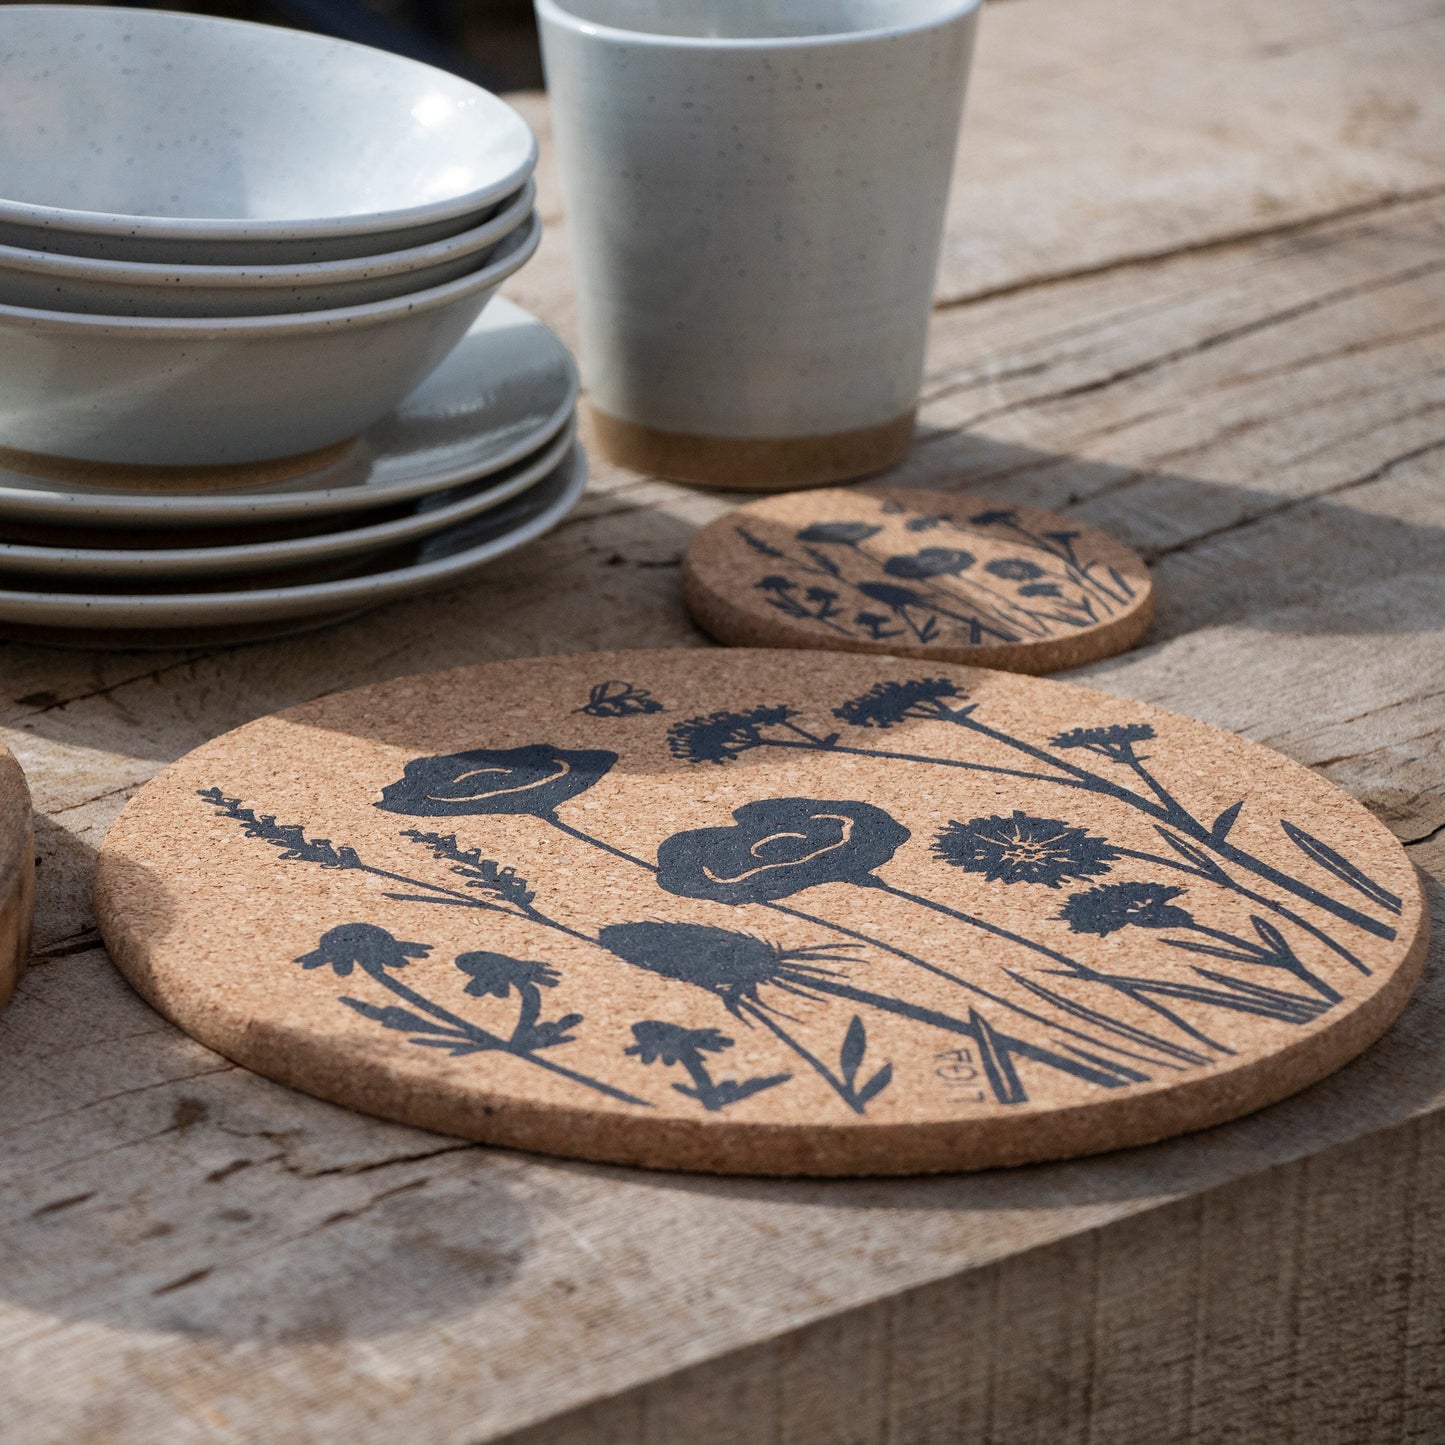 Eco Friendly Cork placemats with a wildflower design, inspired by nature.